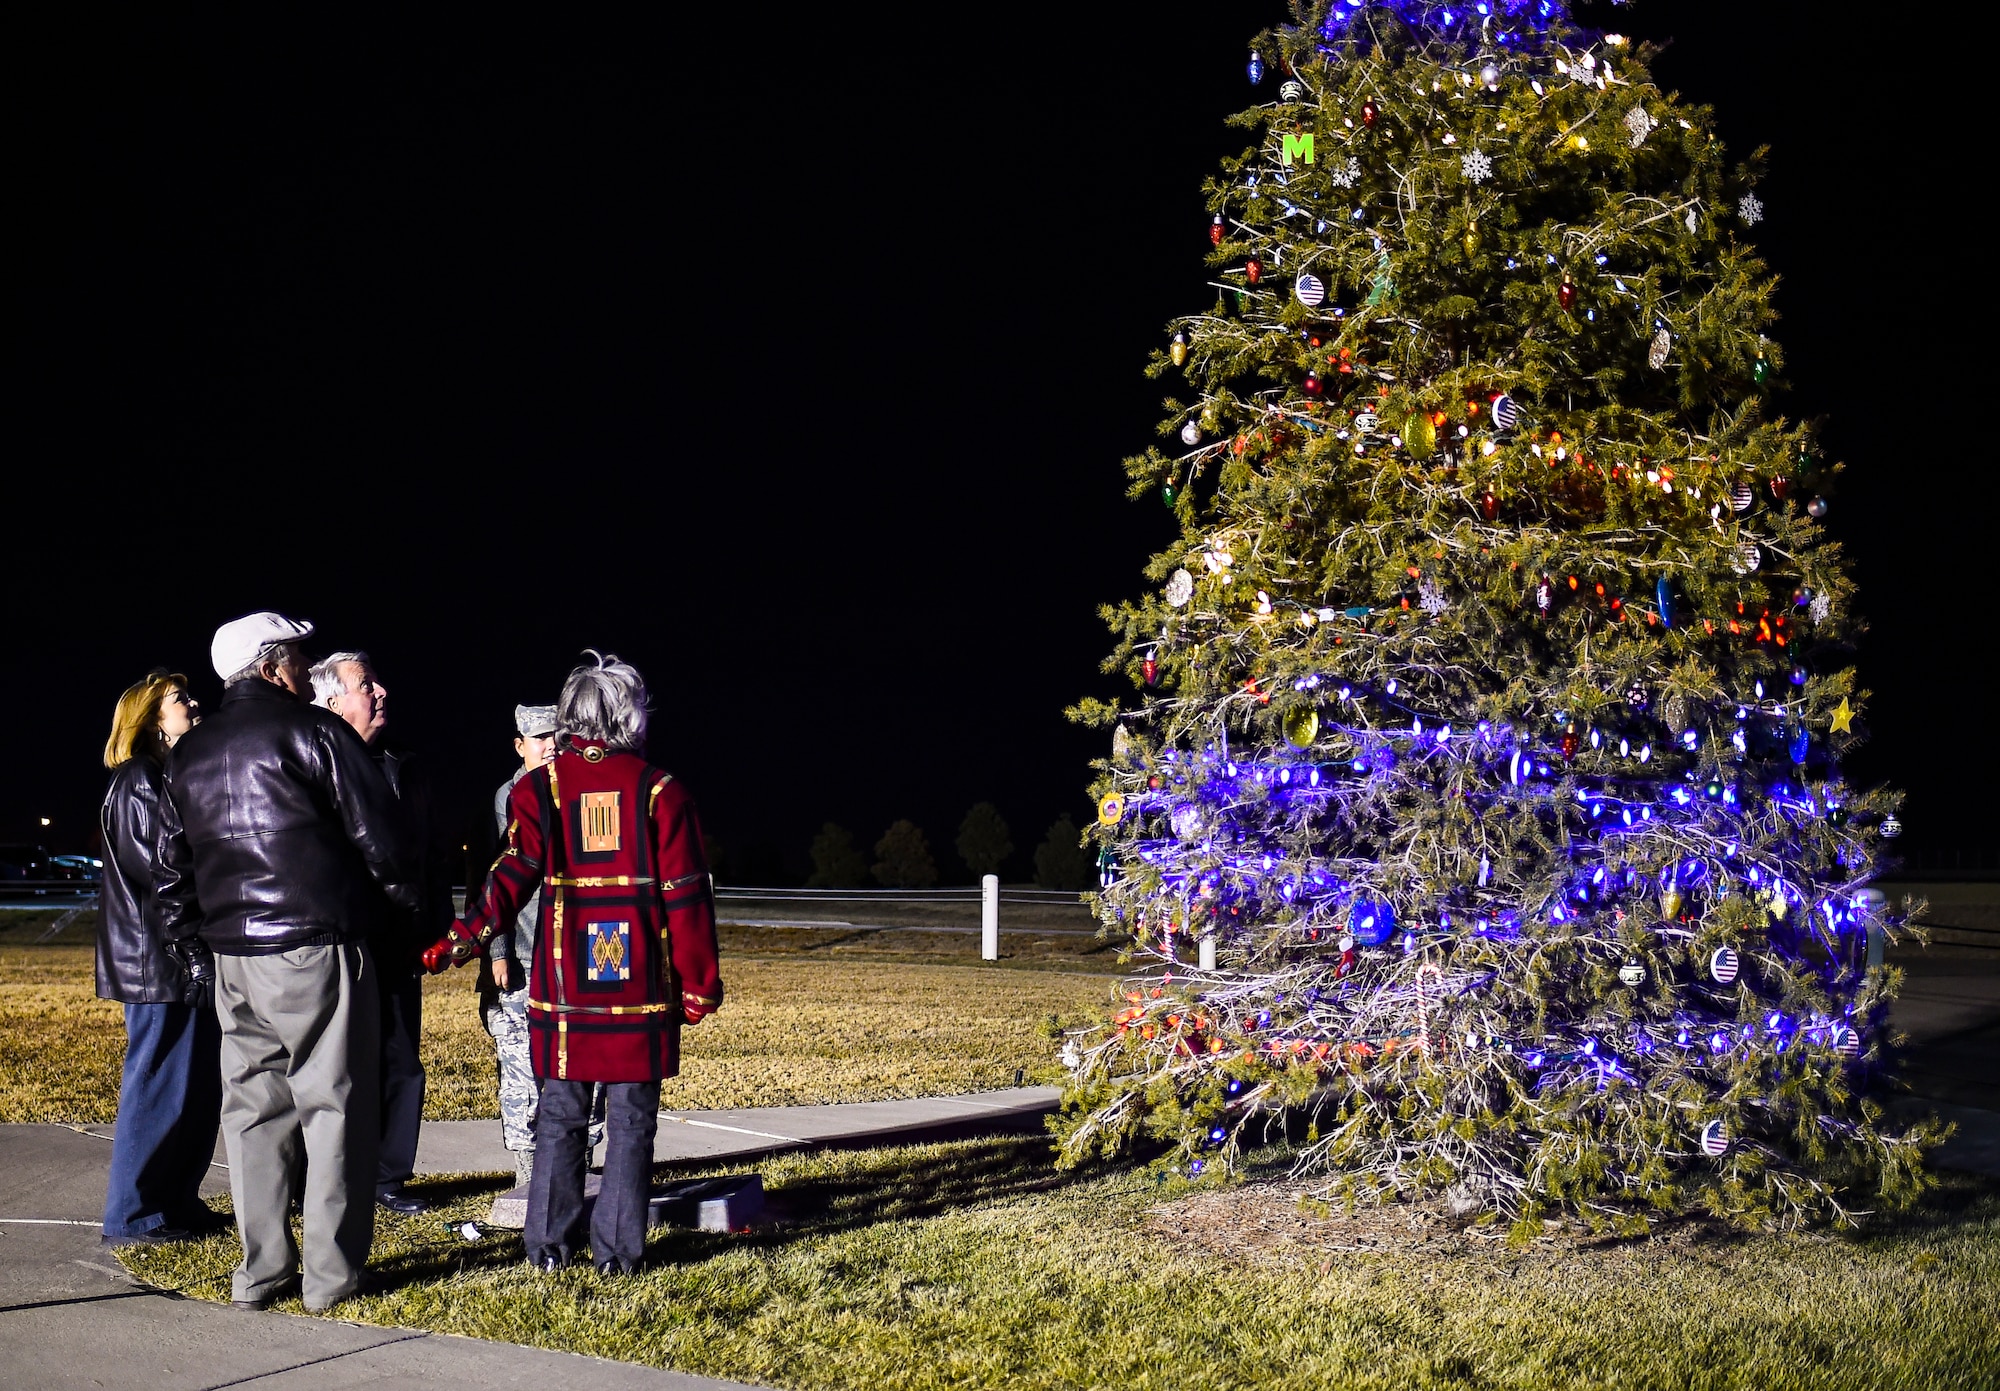 Family members of the late Senior Airman Kristopher Mansfield light the tree in honor of Kristopher Dec. 2, 2014, on Buckley Air Force Base, Colo. The tree-lighting ceremony honored Kristopher and Senior Airman Michael Snyder, both members of the 460th Space Communications Squadron who were killed by drunk drivers. (U.S. Air Force photo by Senior Airman Riley Johnson/Released)